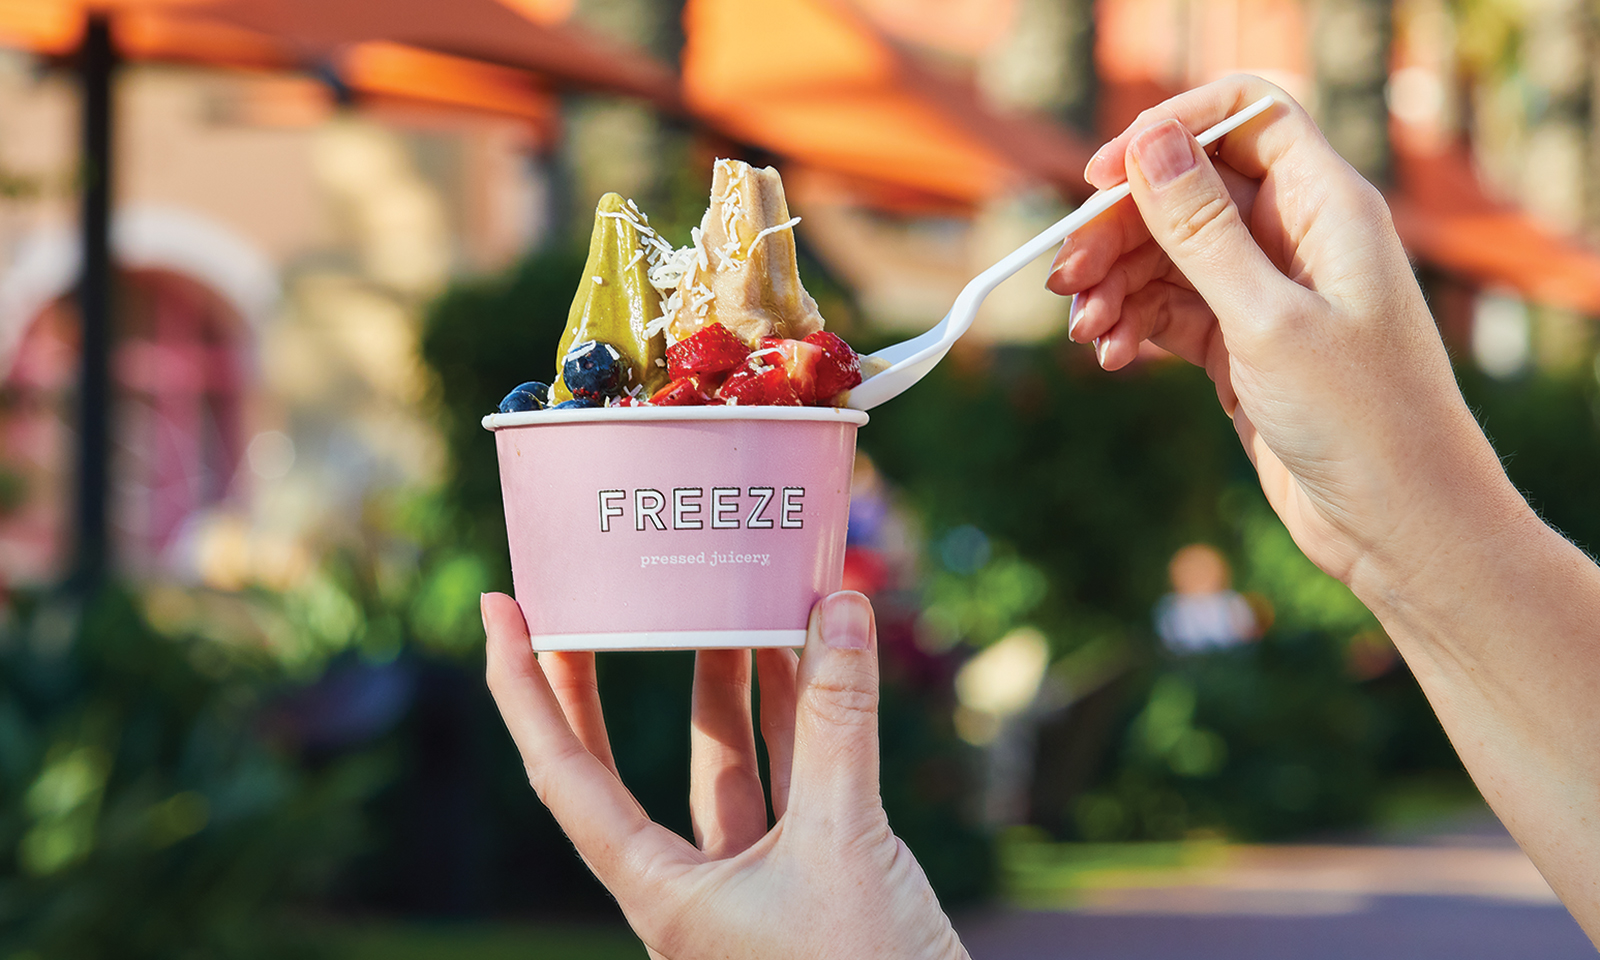 Pressed Juicery’s revolutionary plant-based soft-serve is made from real fr...